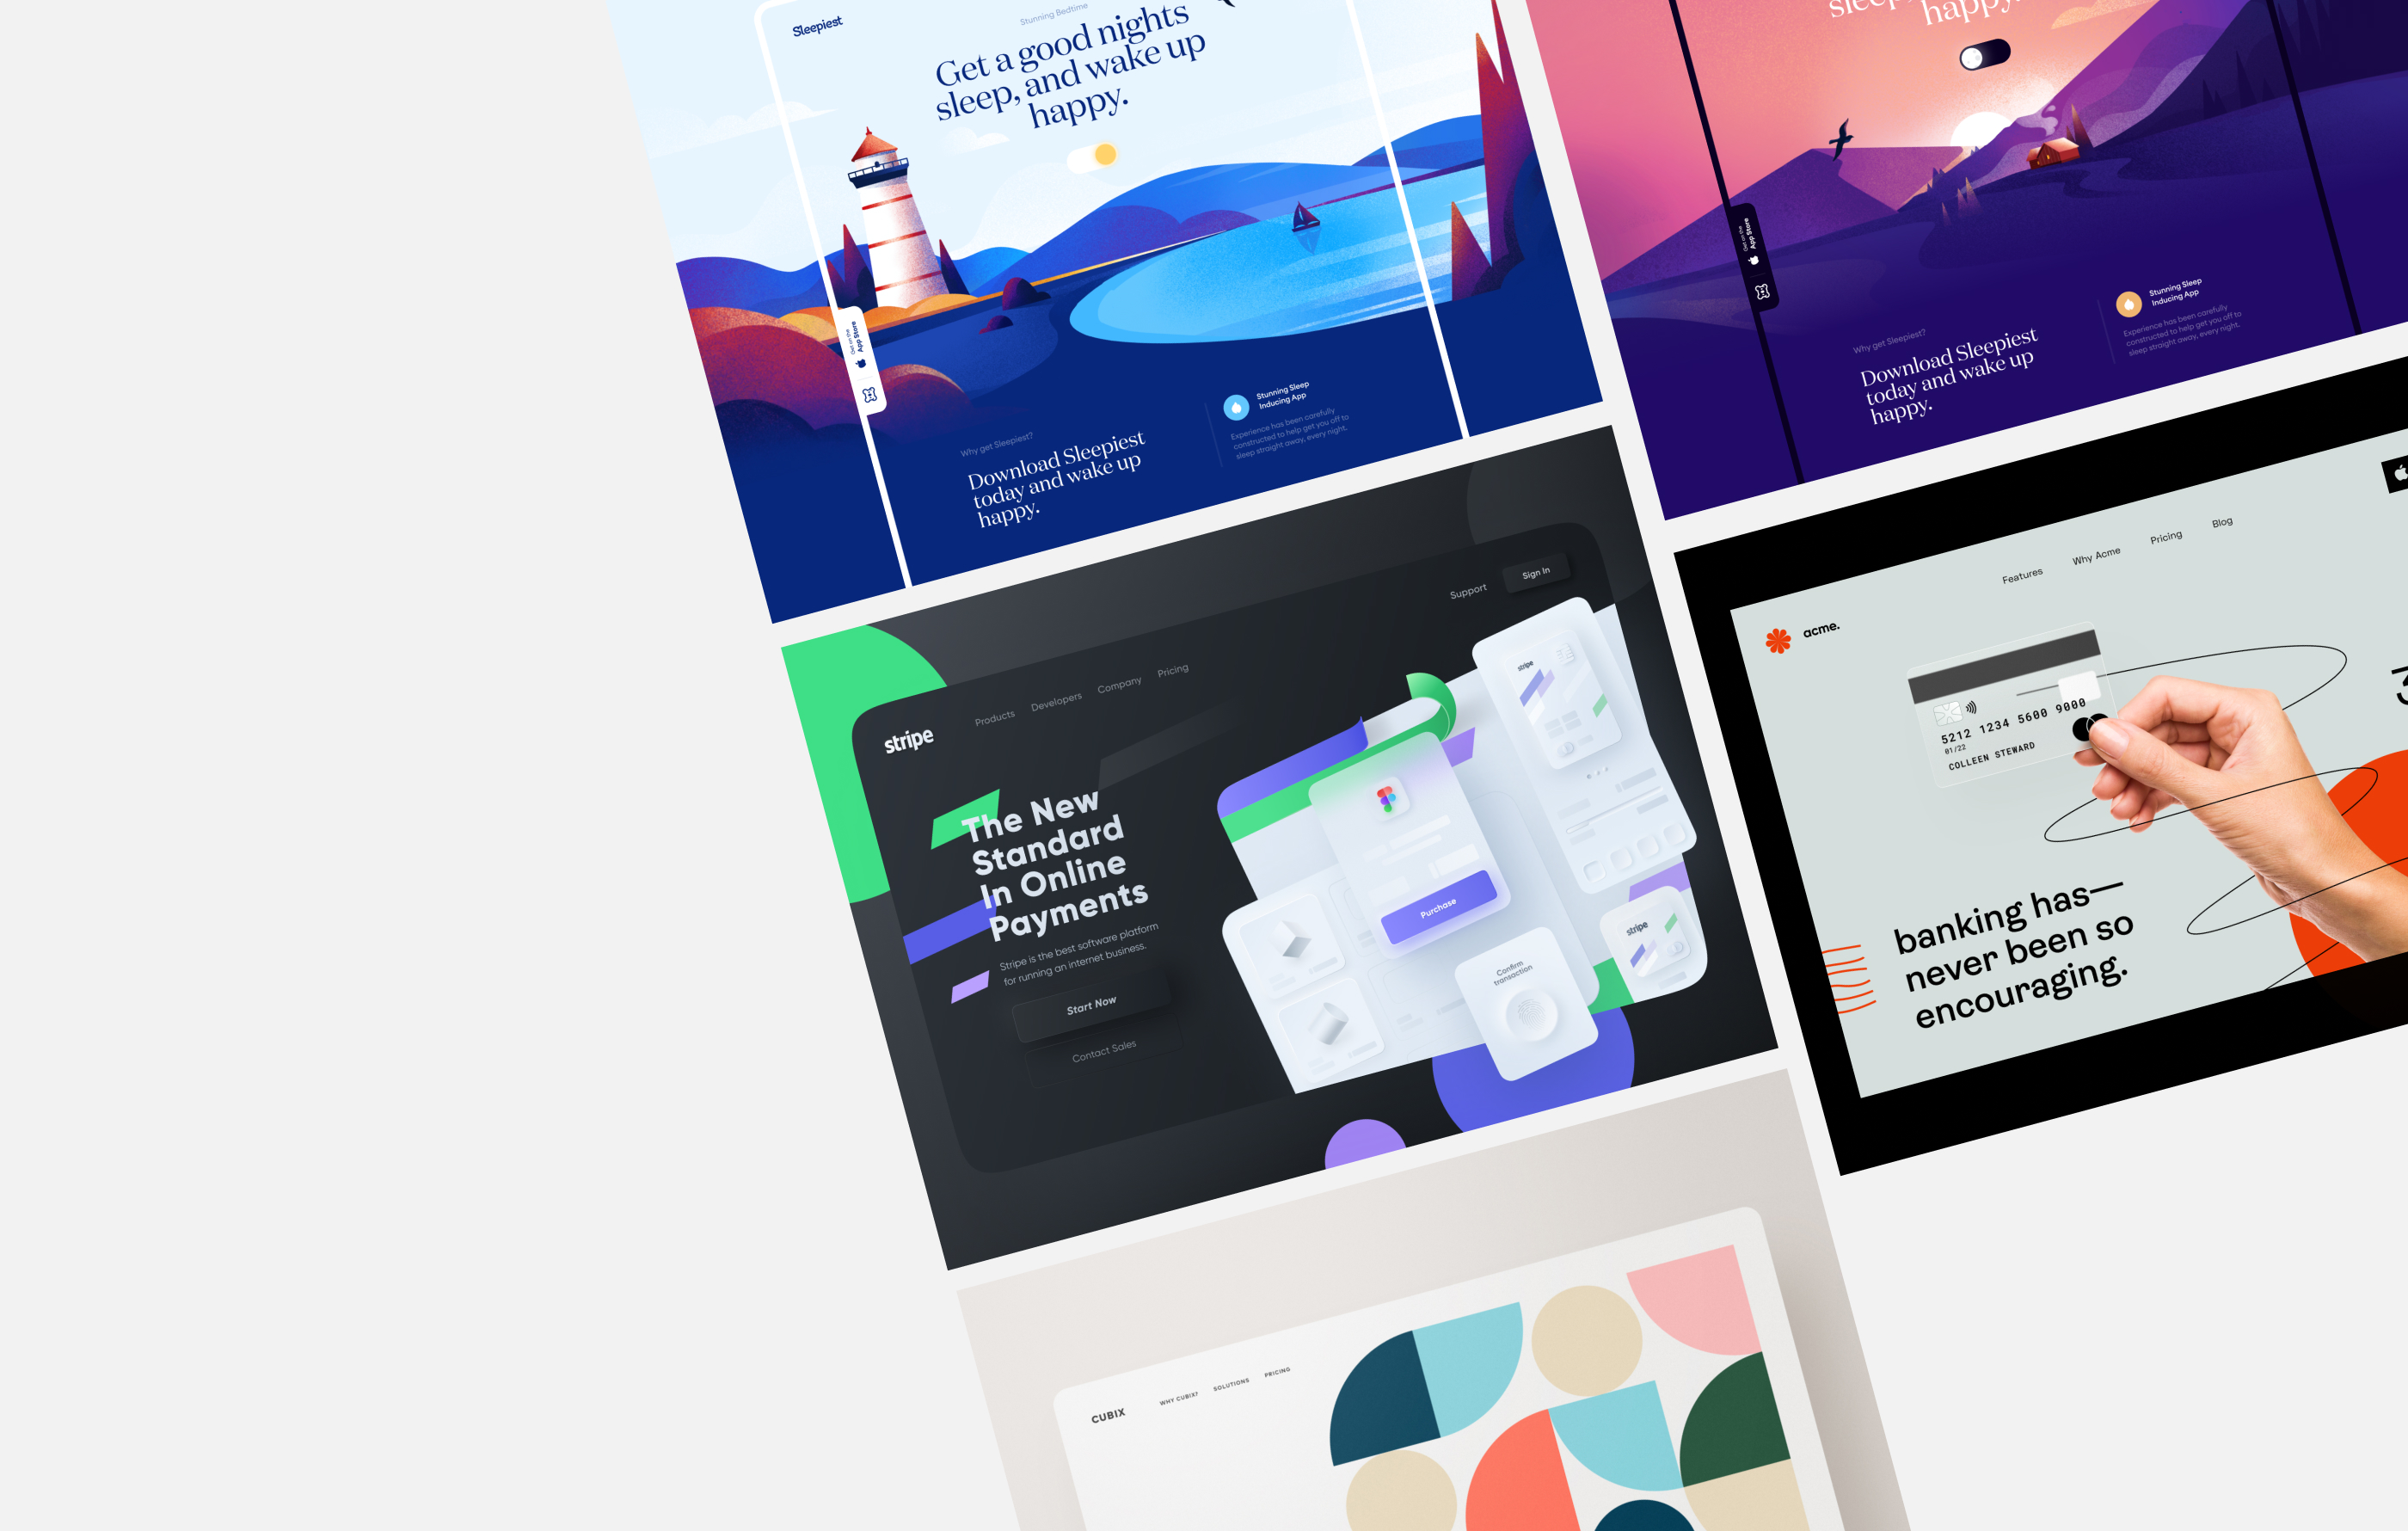 Product Page screen design idea #429: Web Design Inspiration: Landing Pages